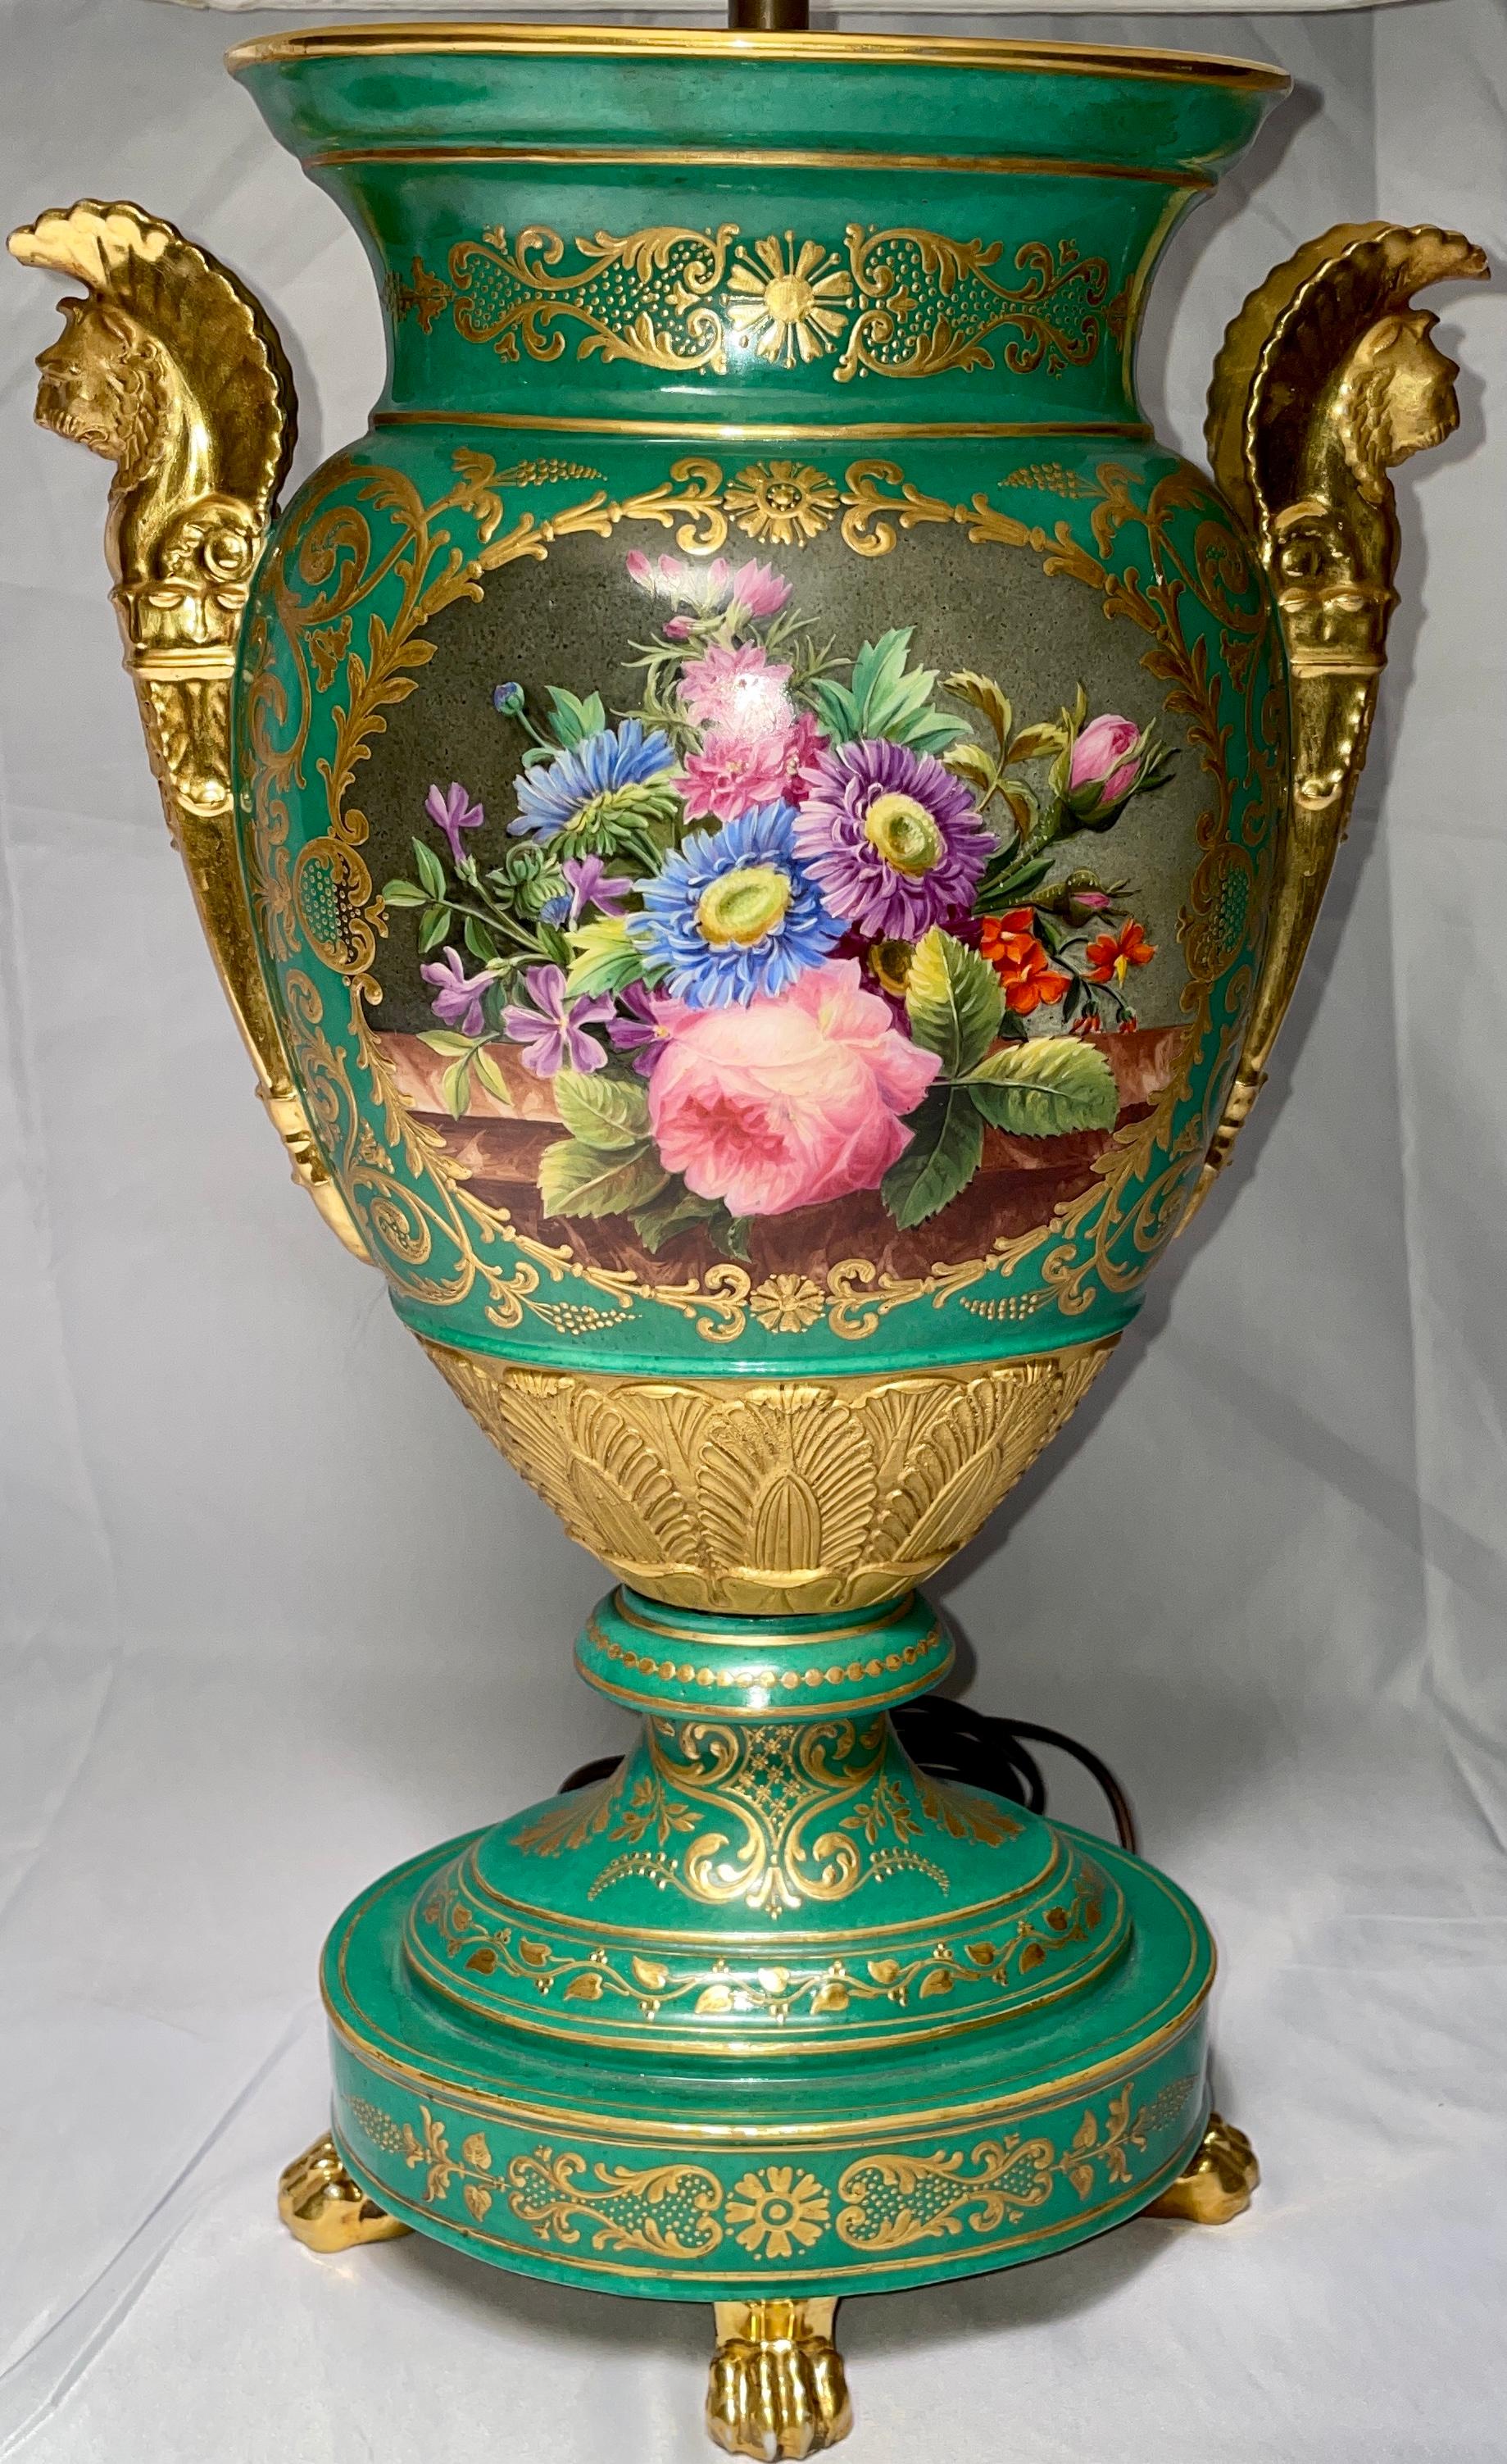 Antique 19th Century French Green and Gold Painted Porcelain Lamp, Circa 1860 For Sale 4